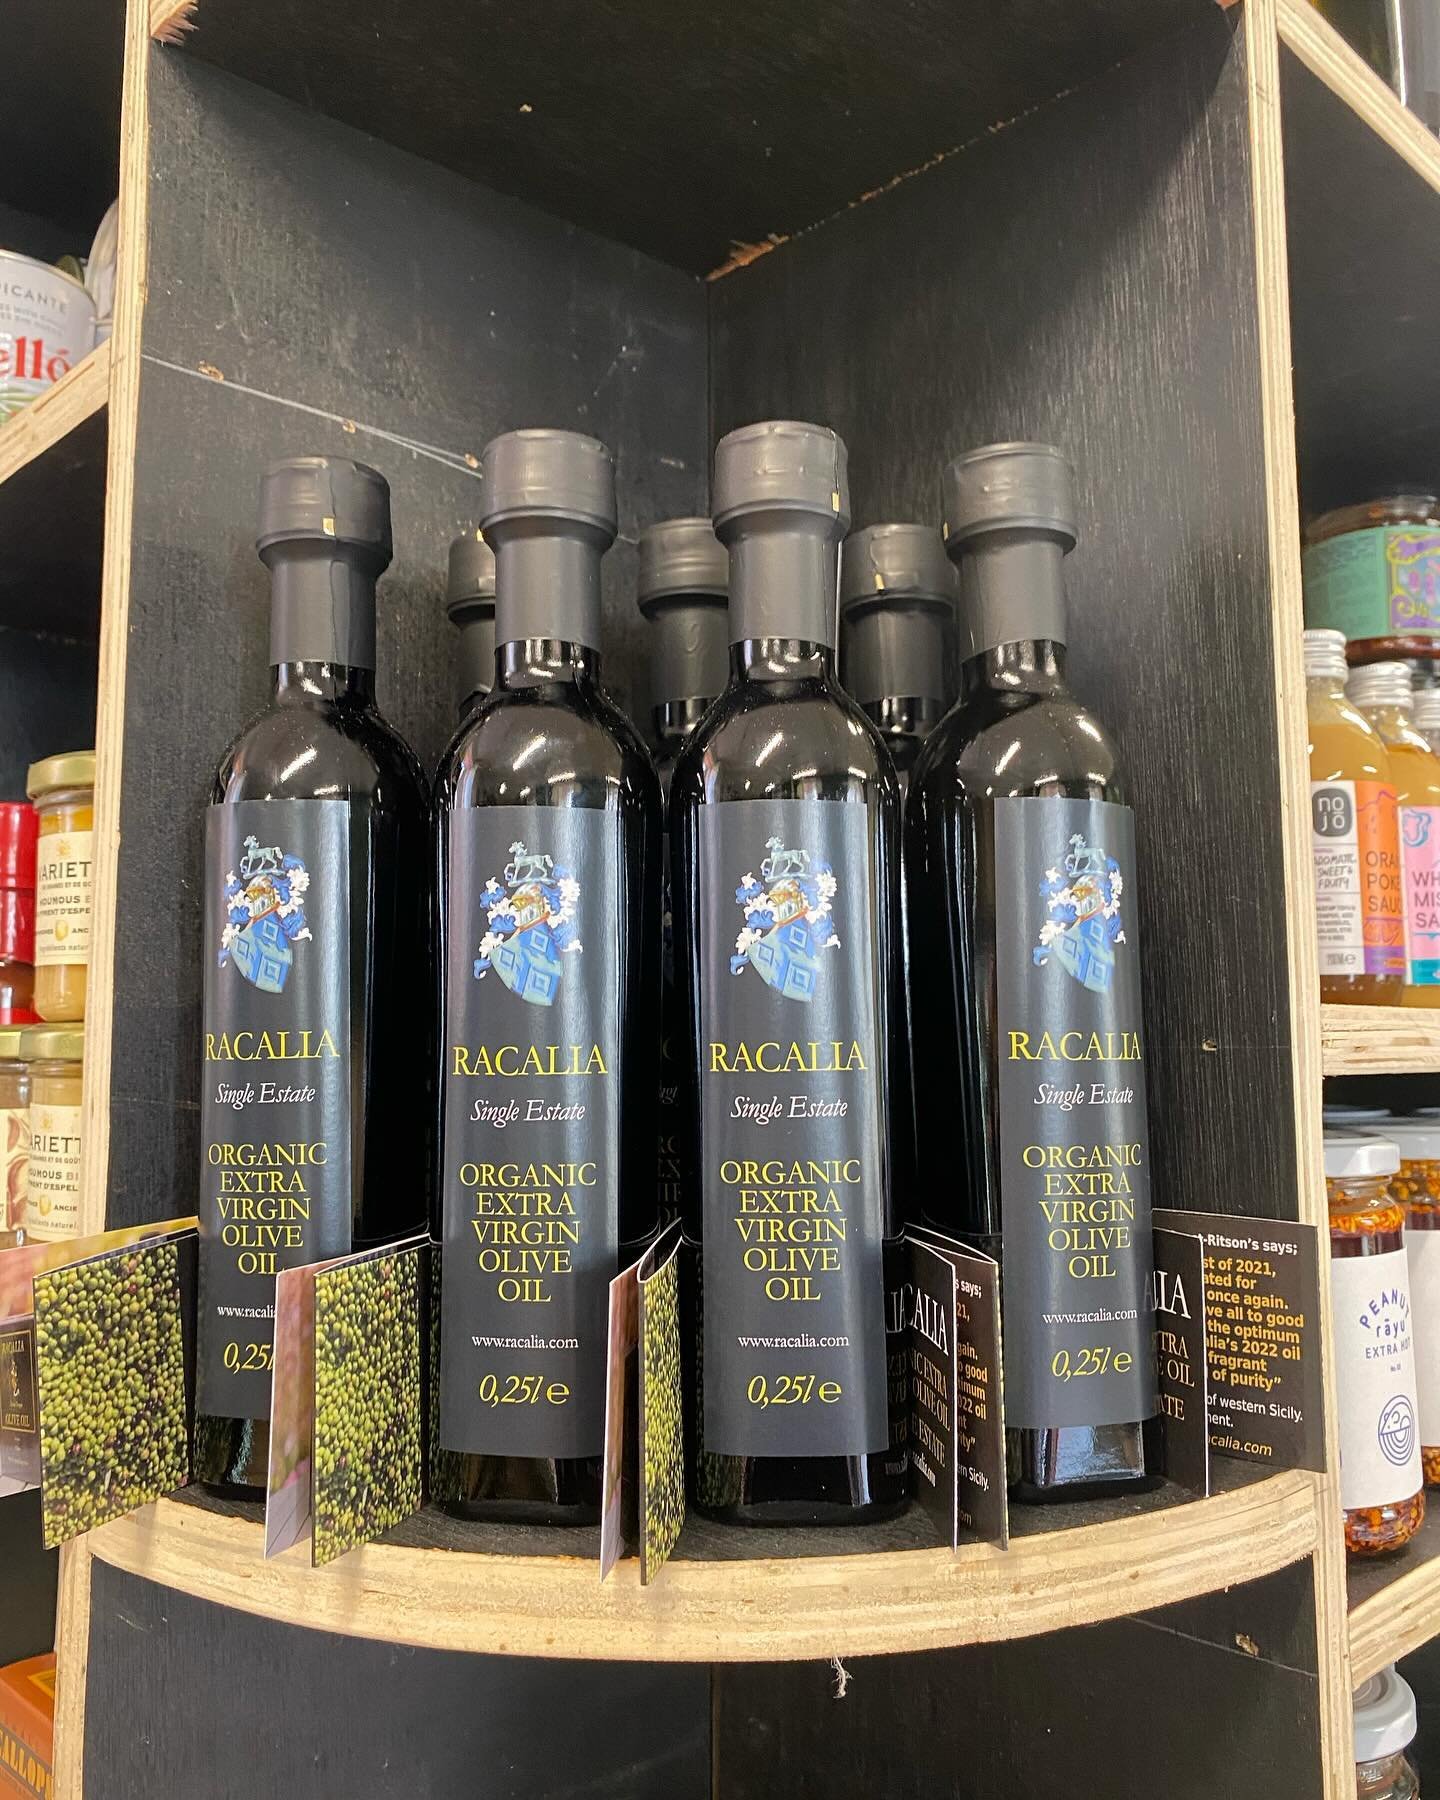 Delighted to be stocked in @thisisreubens - a fantastic butcher, deli &amp; bottle shop in Melton, Suffolk. Our bottles look very happy on the shelves here. 🙌

Come &amp; find us!

#racaliaoliveoil #deli #organic #suffolk #suffolklife #treetotable